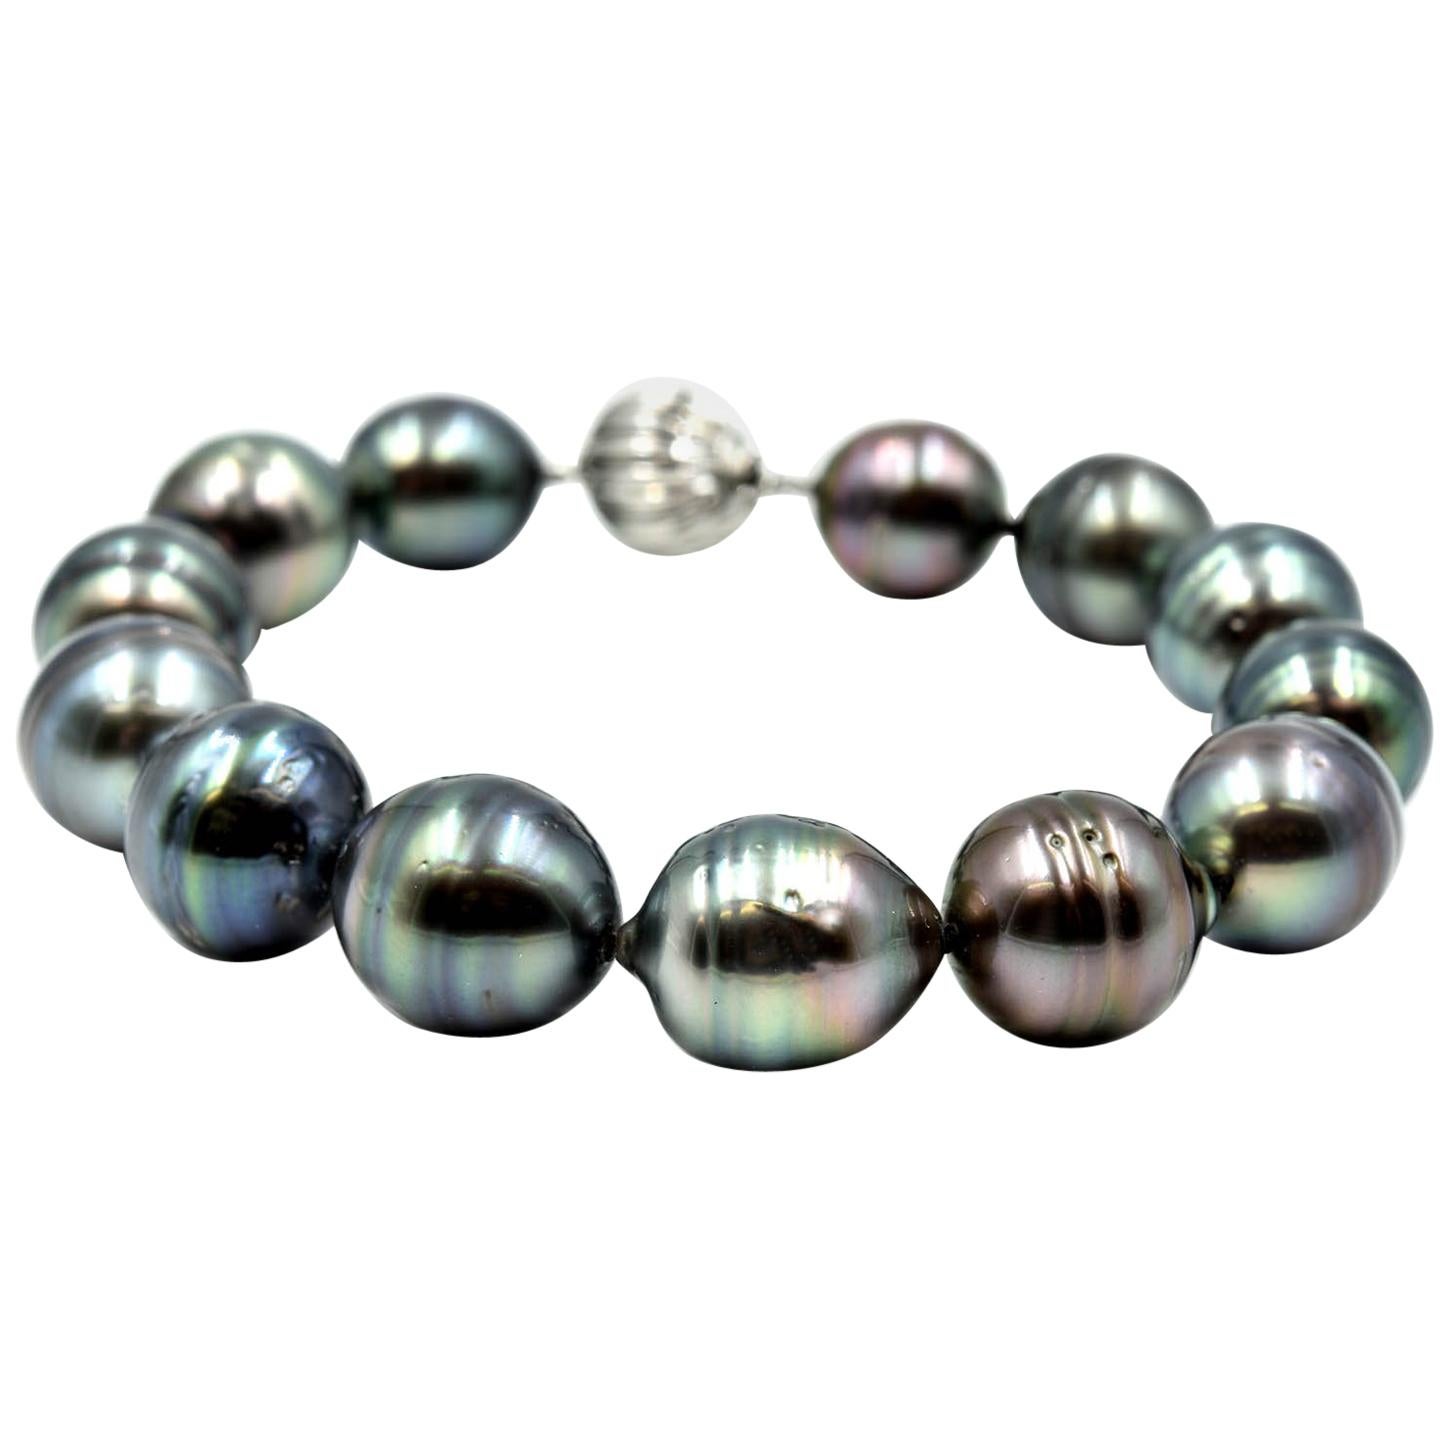 Baroque Pearl Bracelet with 14 Karat White Gold Clasp